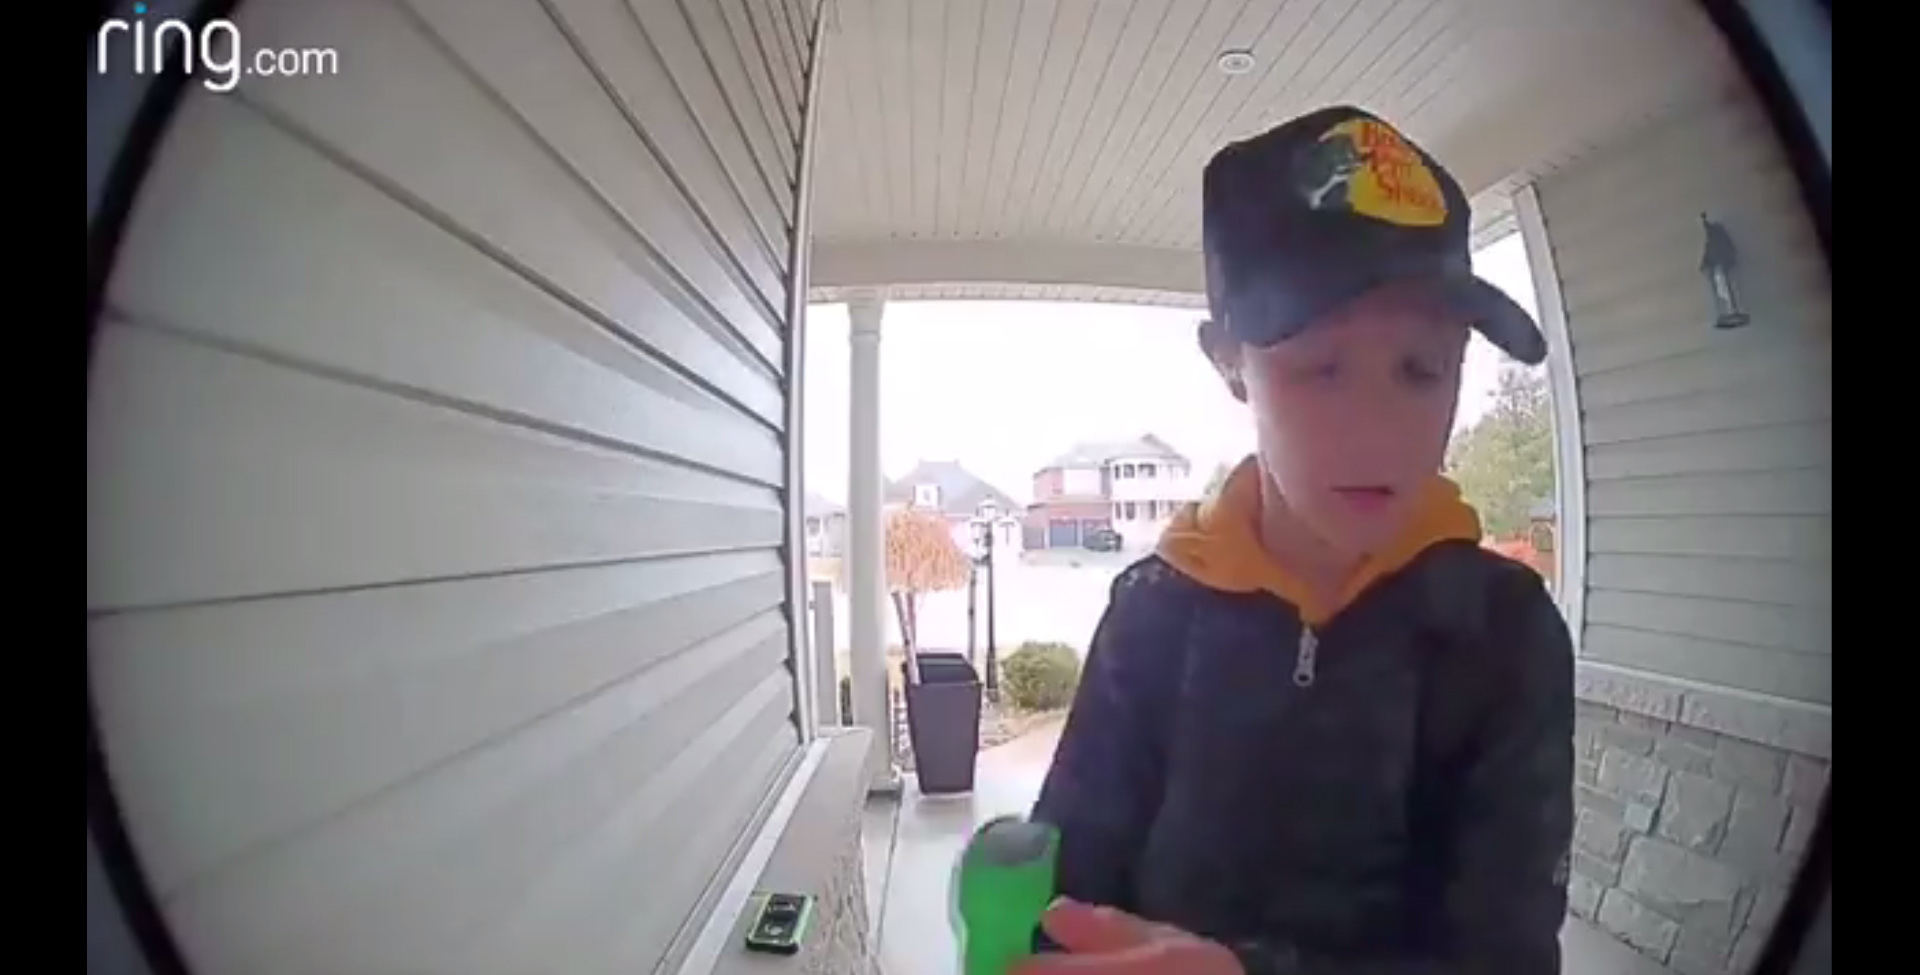 PHOTO: A video shared on Twitter on April 11, 2018 shows a young boy examining and then kissing a hockey stick left in tribute to those who died in the Humboldt Broncos bus crash earlier in the month.